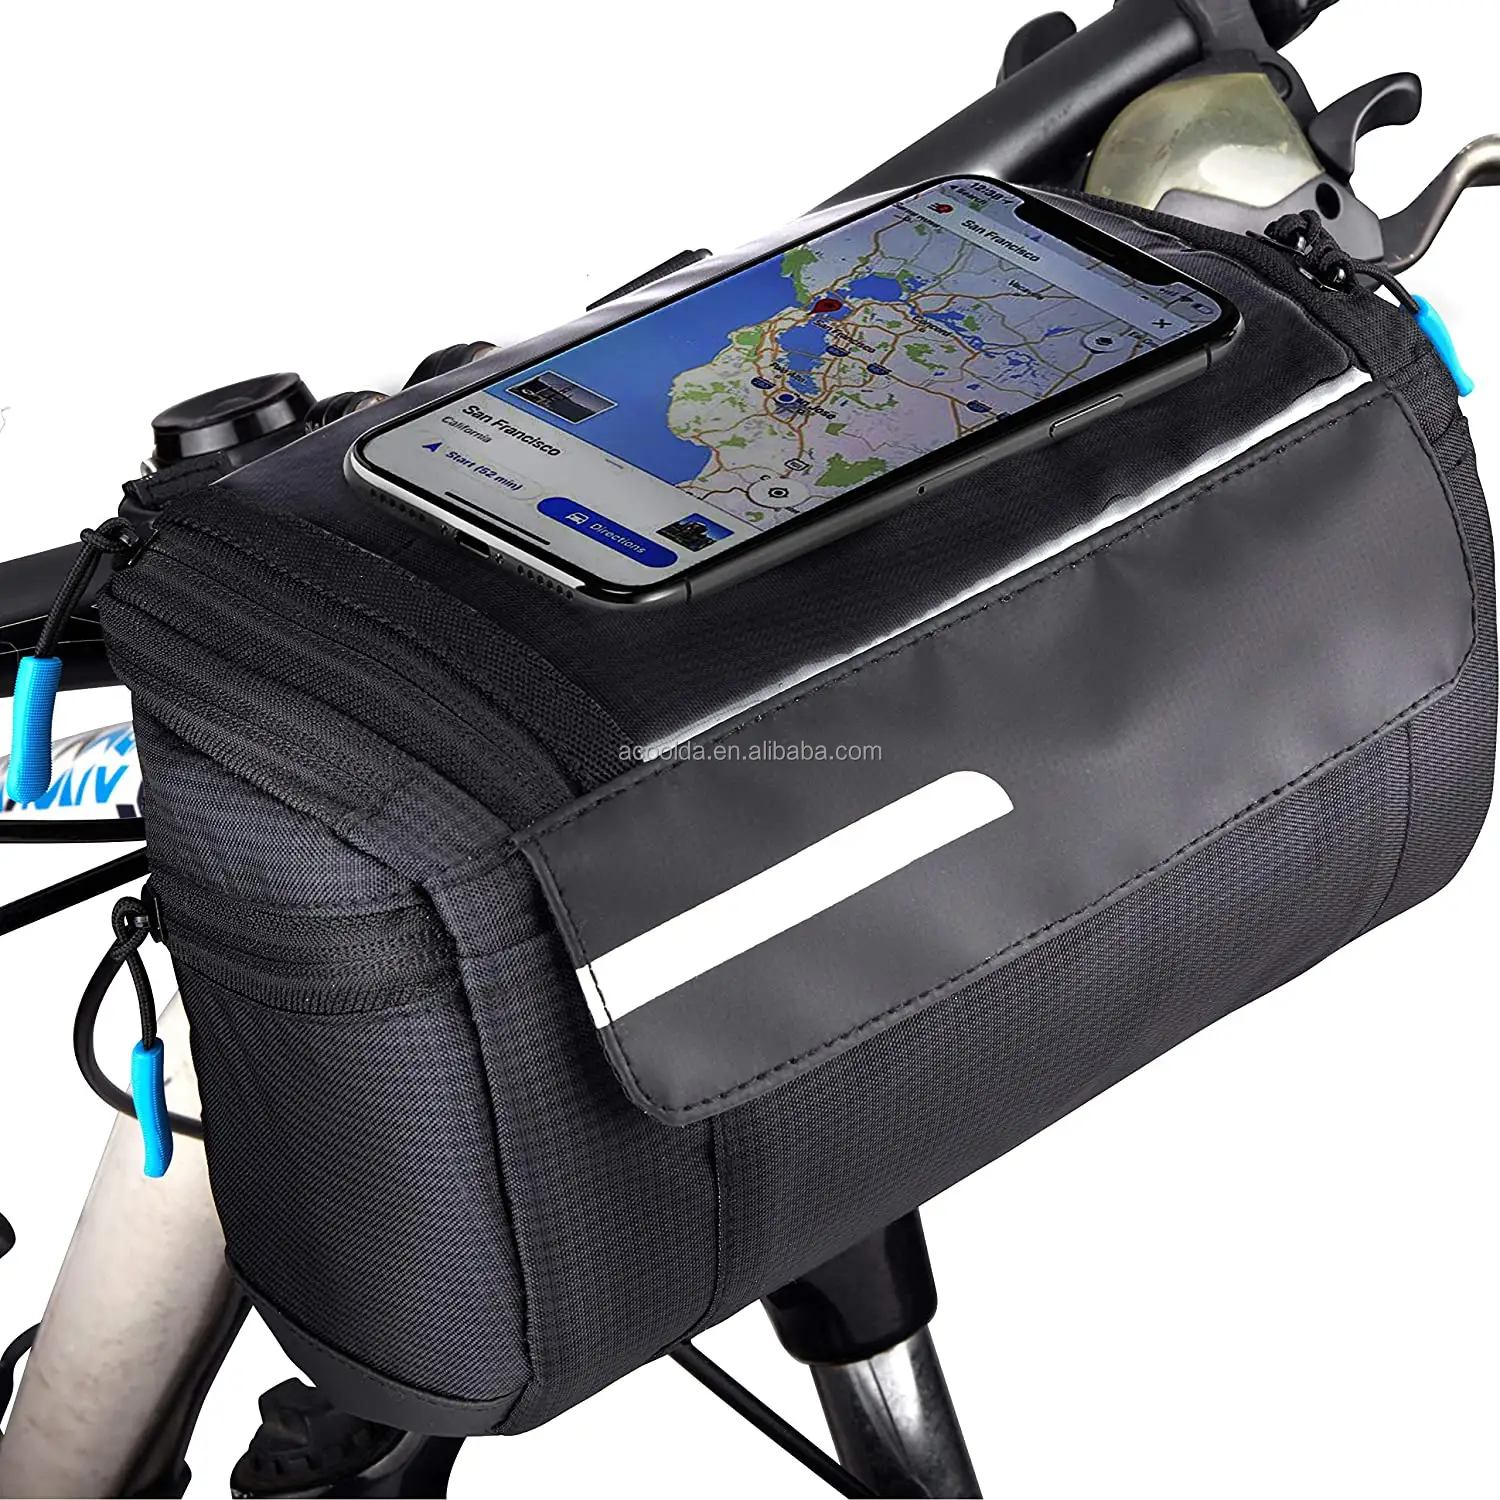 Bike Pouch Handlebars Bags Waterproof Compact Quick Release with Cellphone Holder Front Frame Storage Bags Basket for Bicycles